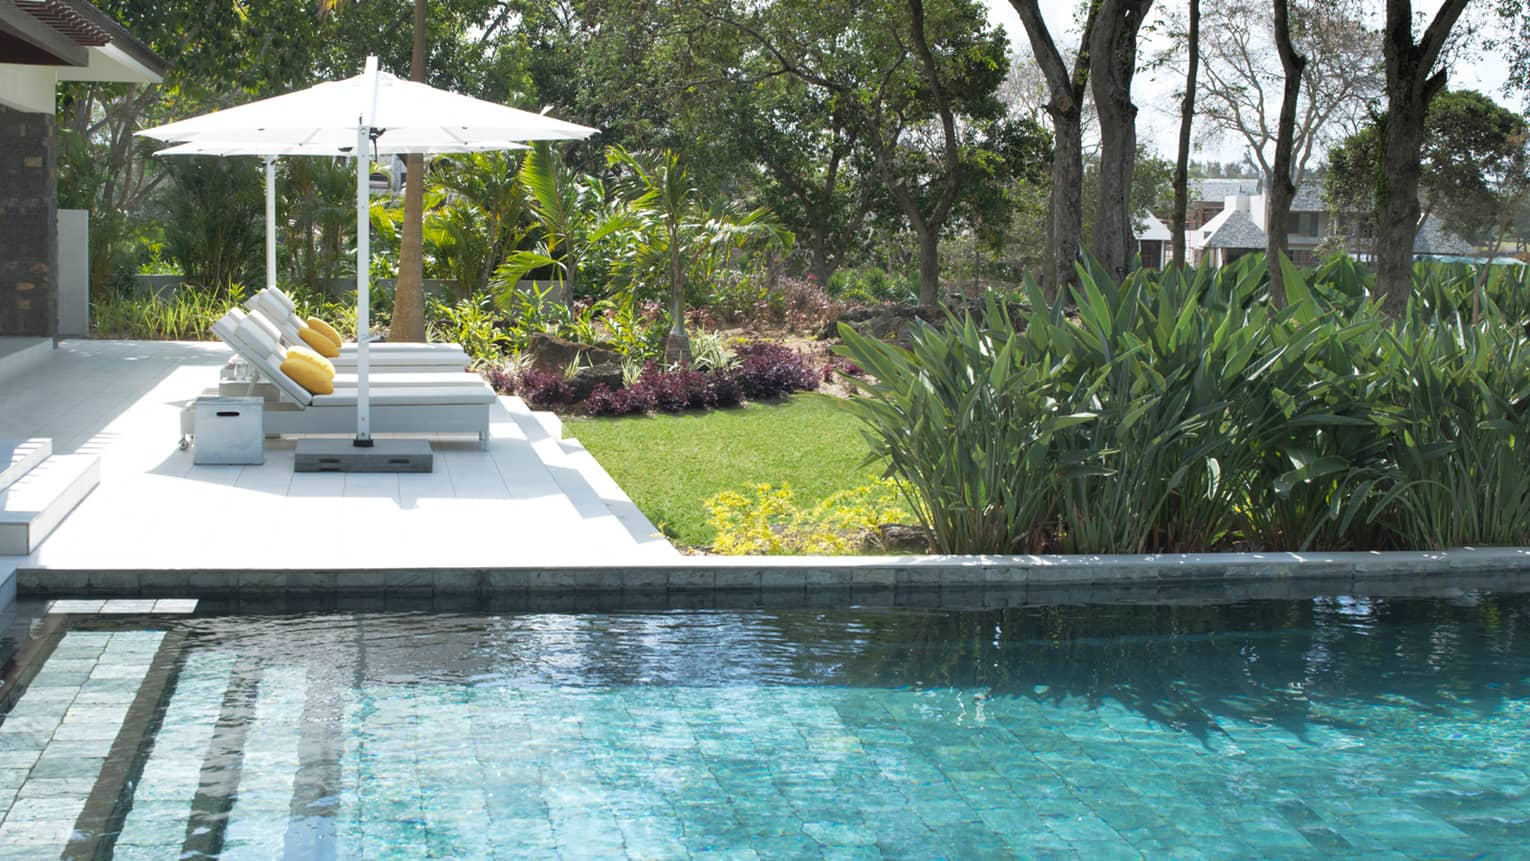 Stone steps leading into villa plunge pool, two white lounge chairs, umbrella on deck